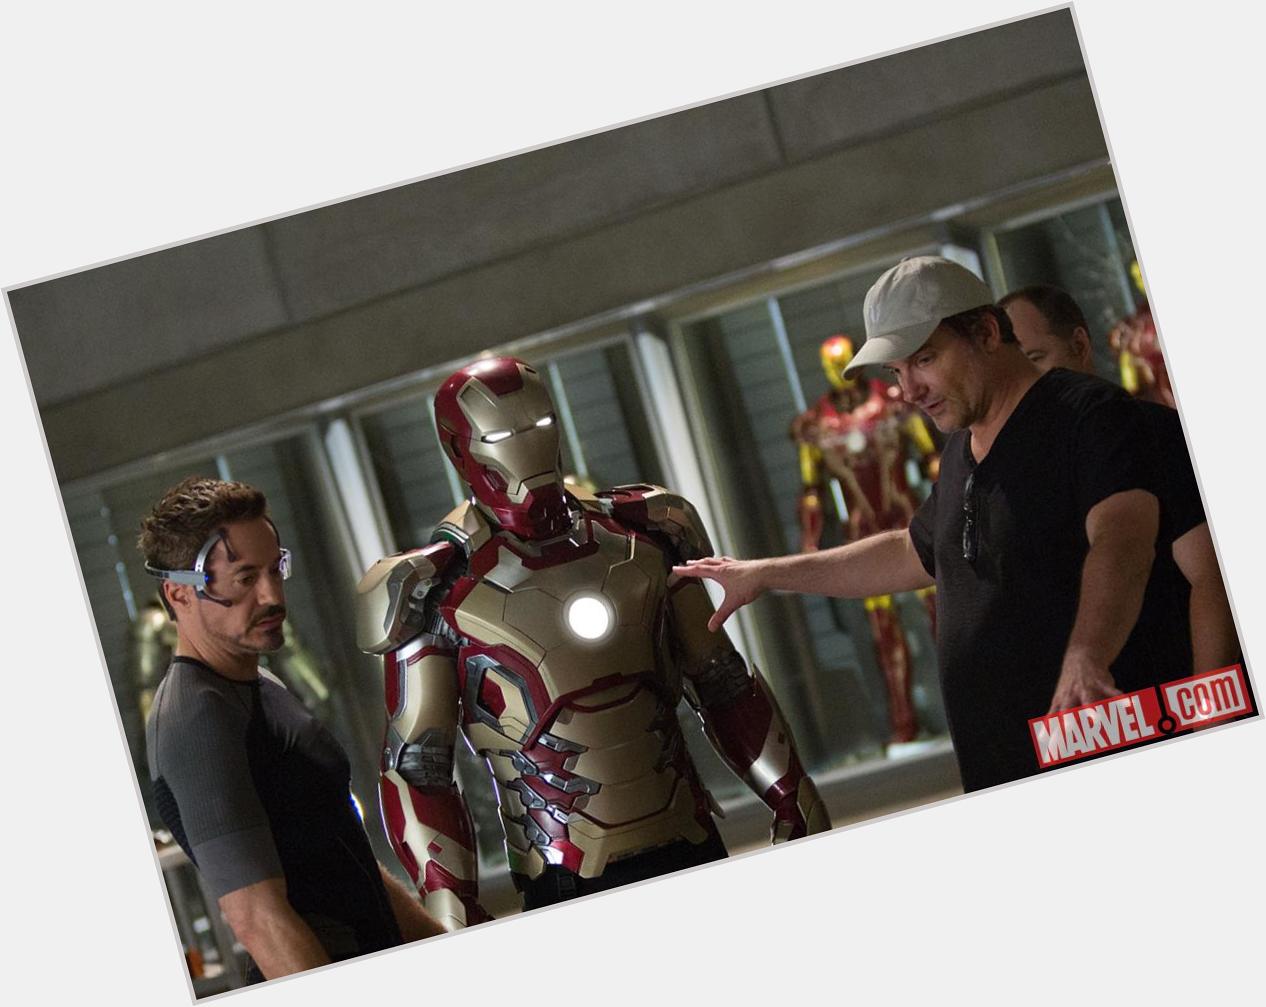 Happy Birthday to Marvels Iron Man 3 director Shane Black! Whats your favourite scene from this movie? 